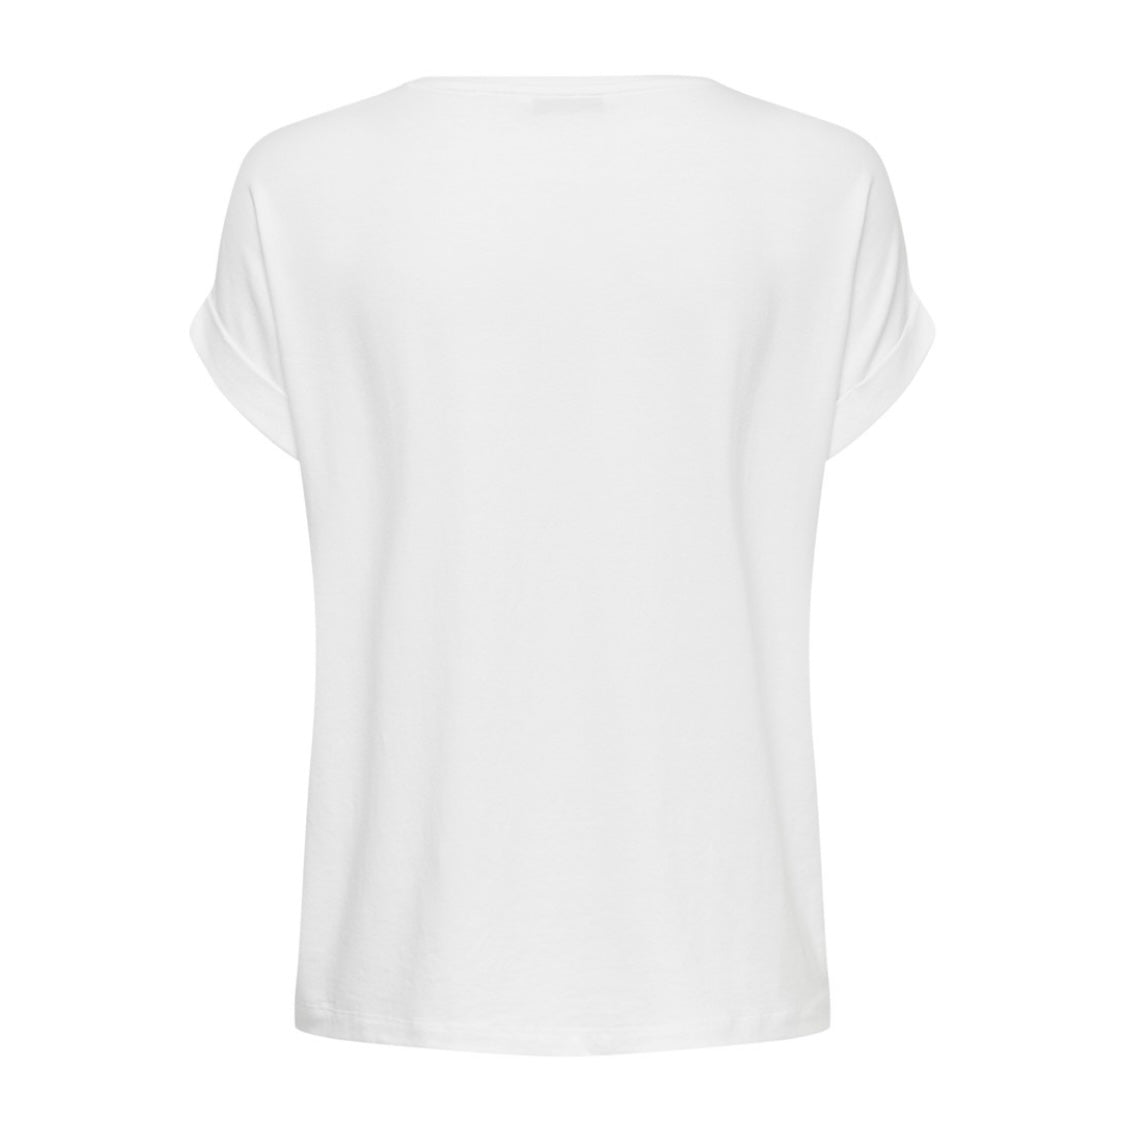 ONLY - MOSTER O-NECK TOP - WHITE